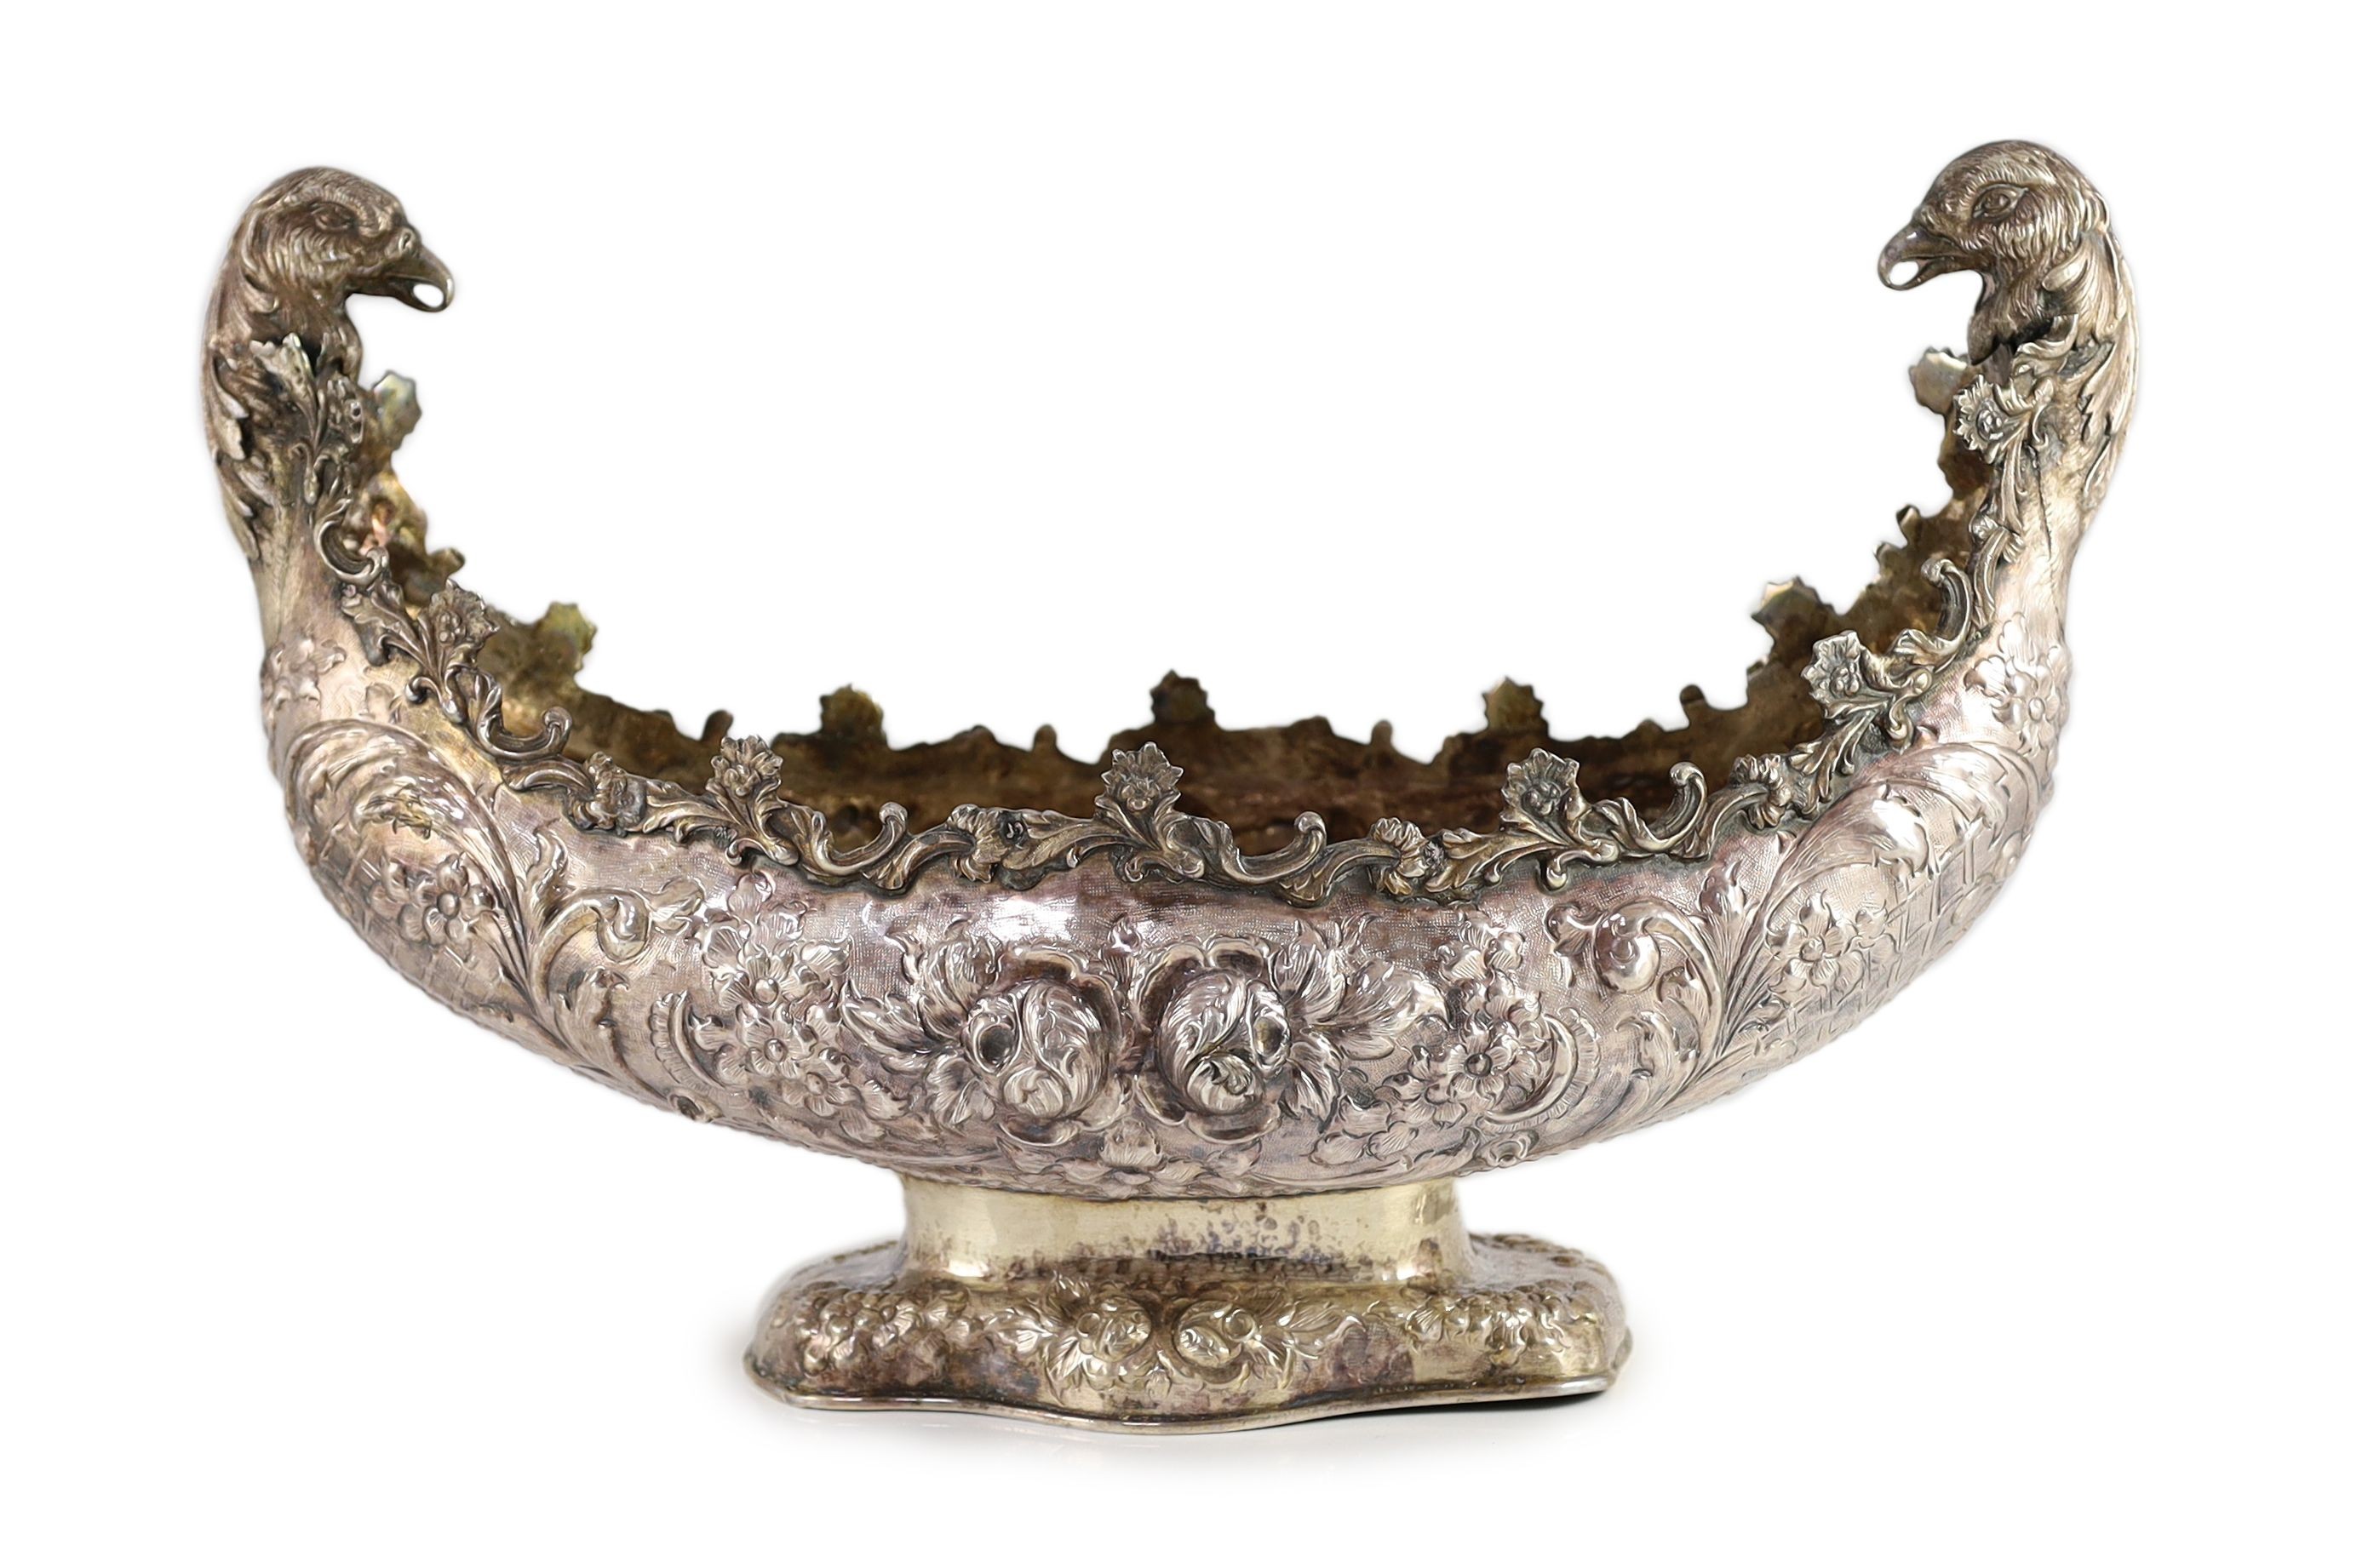 A 20th century Continental embossed 900 standard silver boat shaped centrepiece bowl